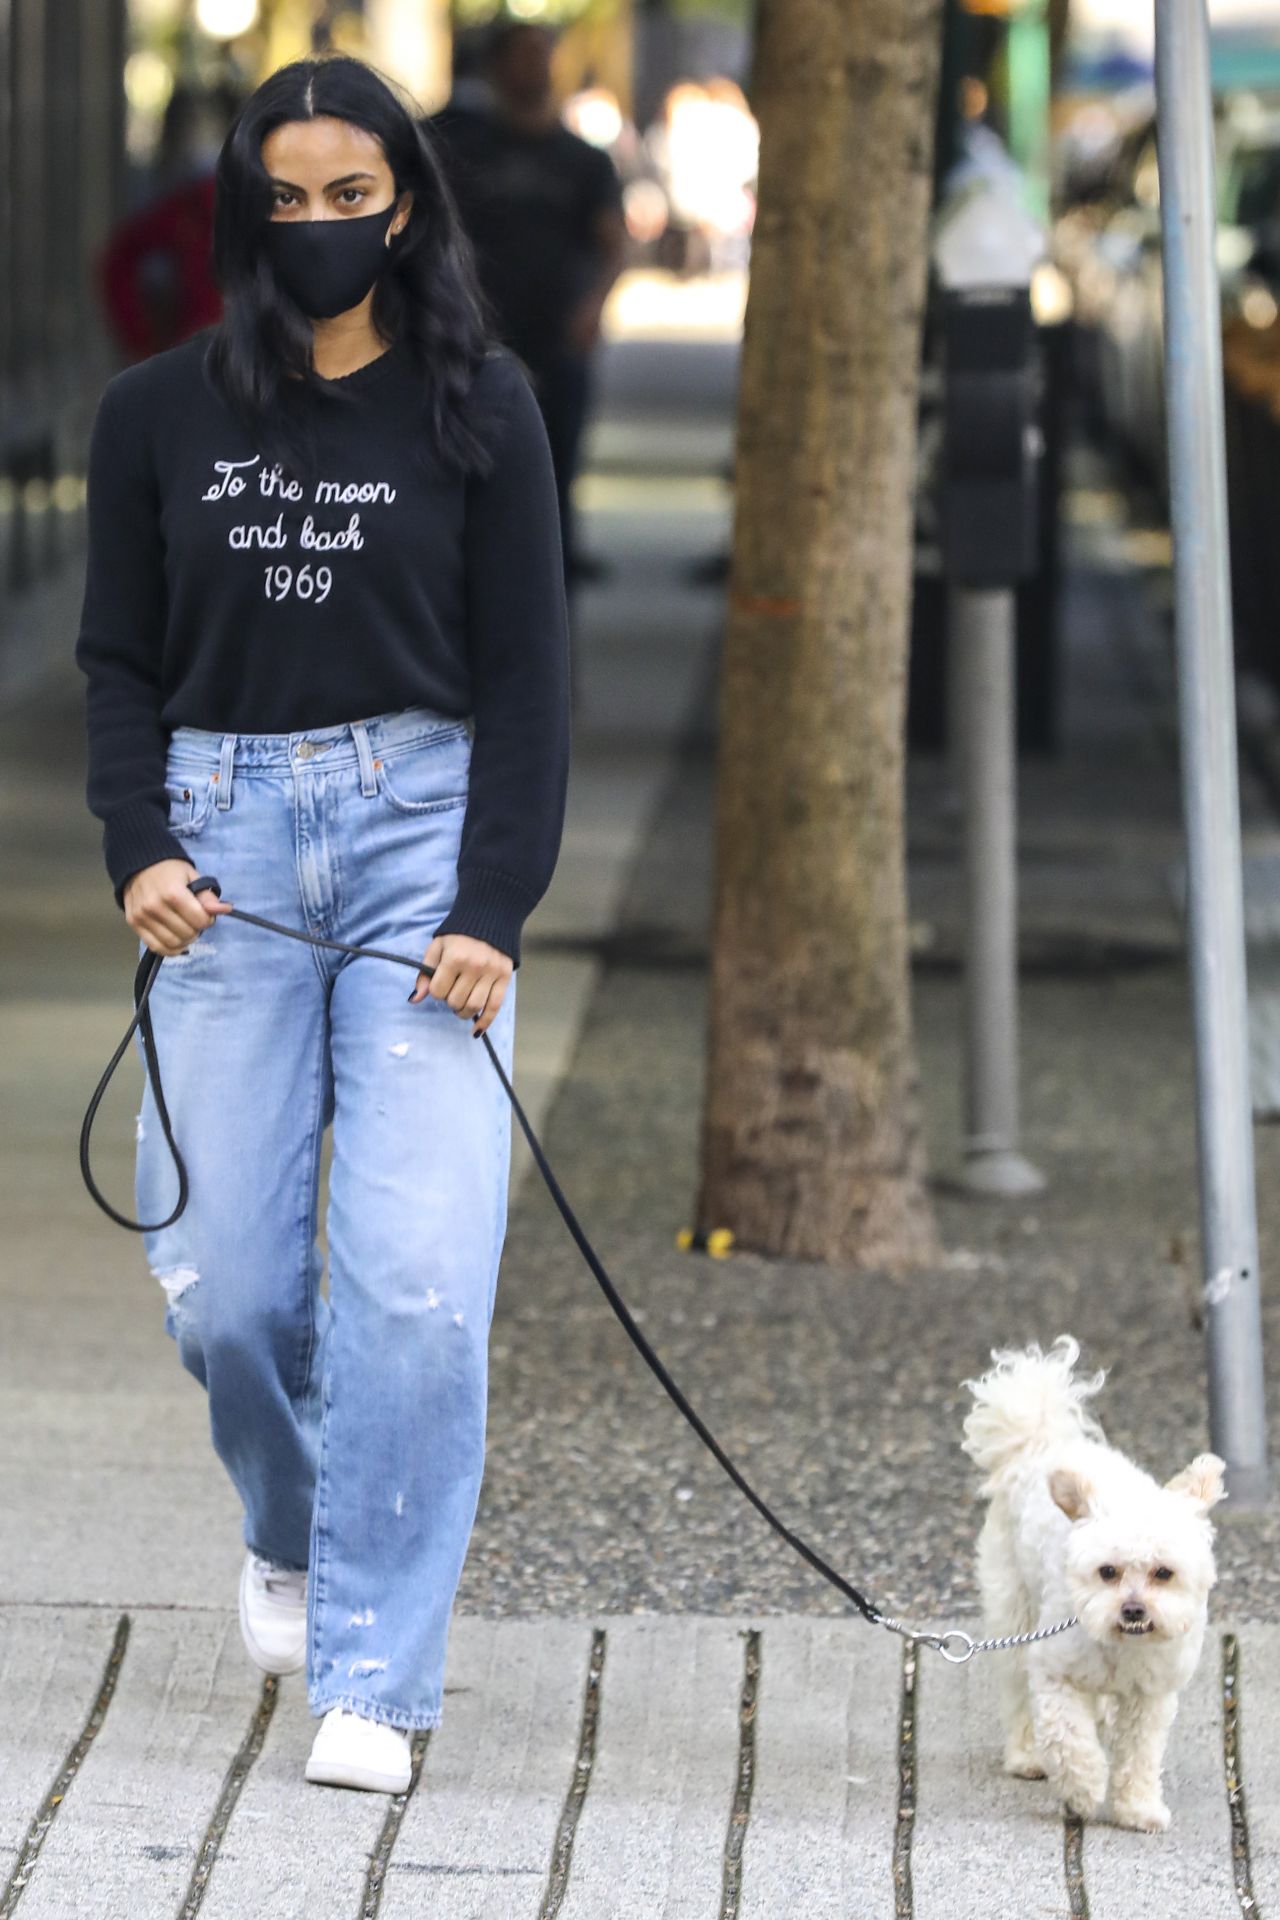 camila-mendes-street-style-vancouver-10-15-2020-3.jpg